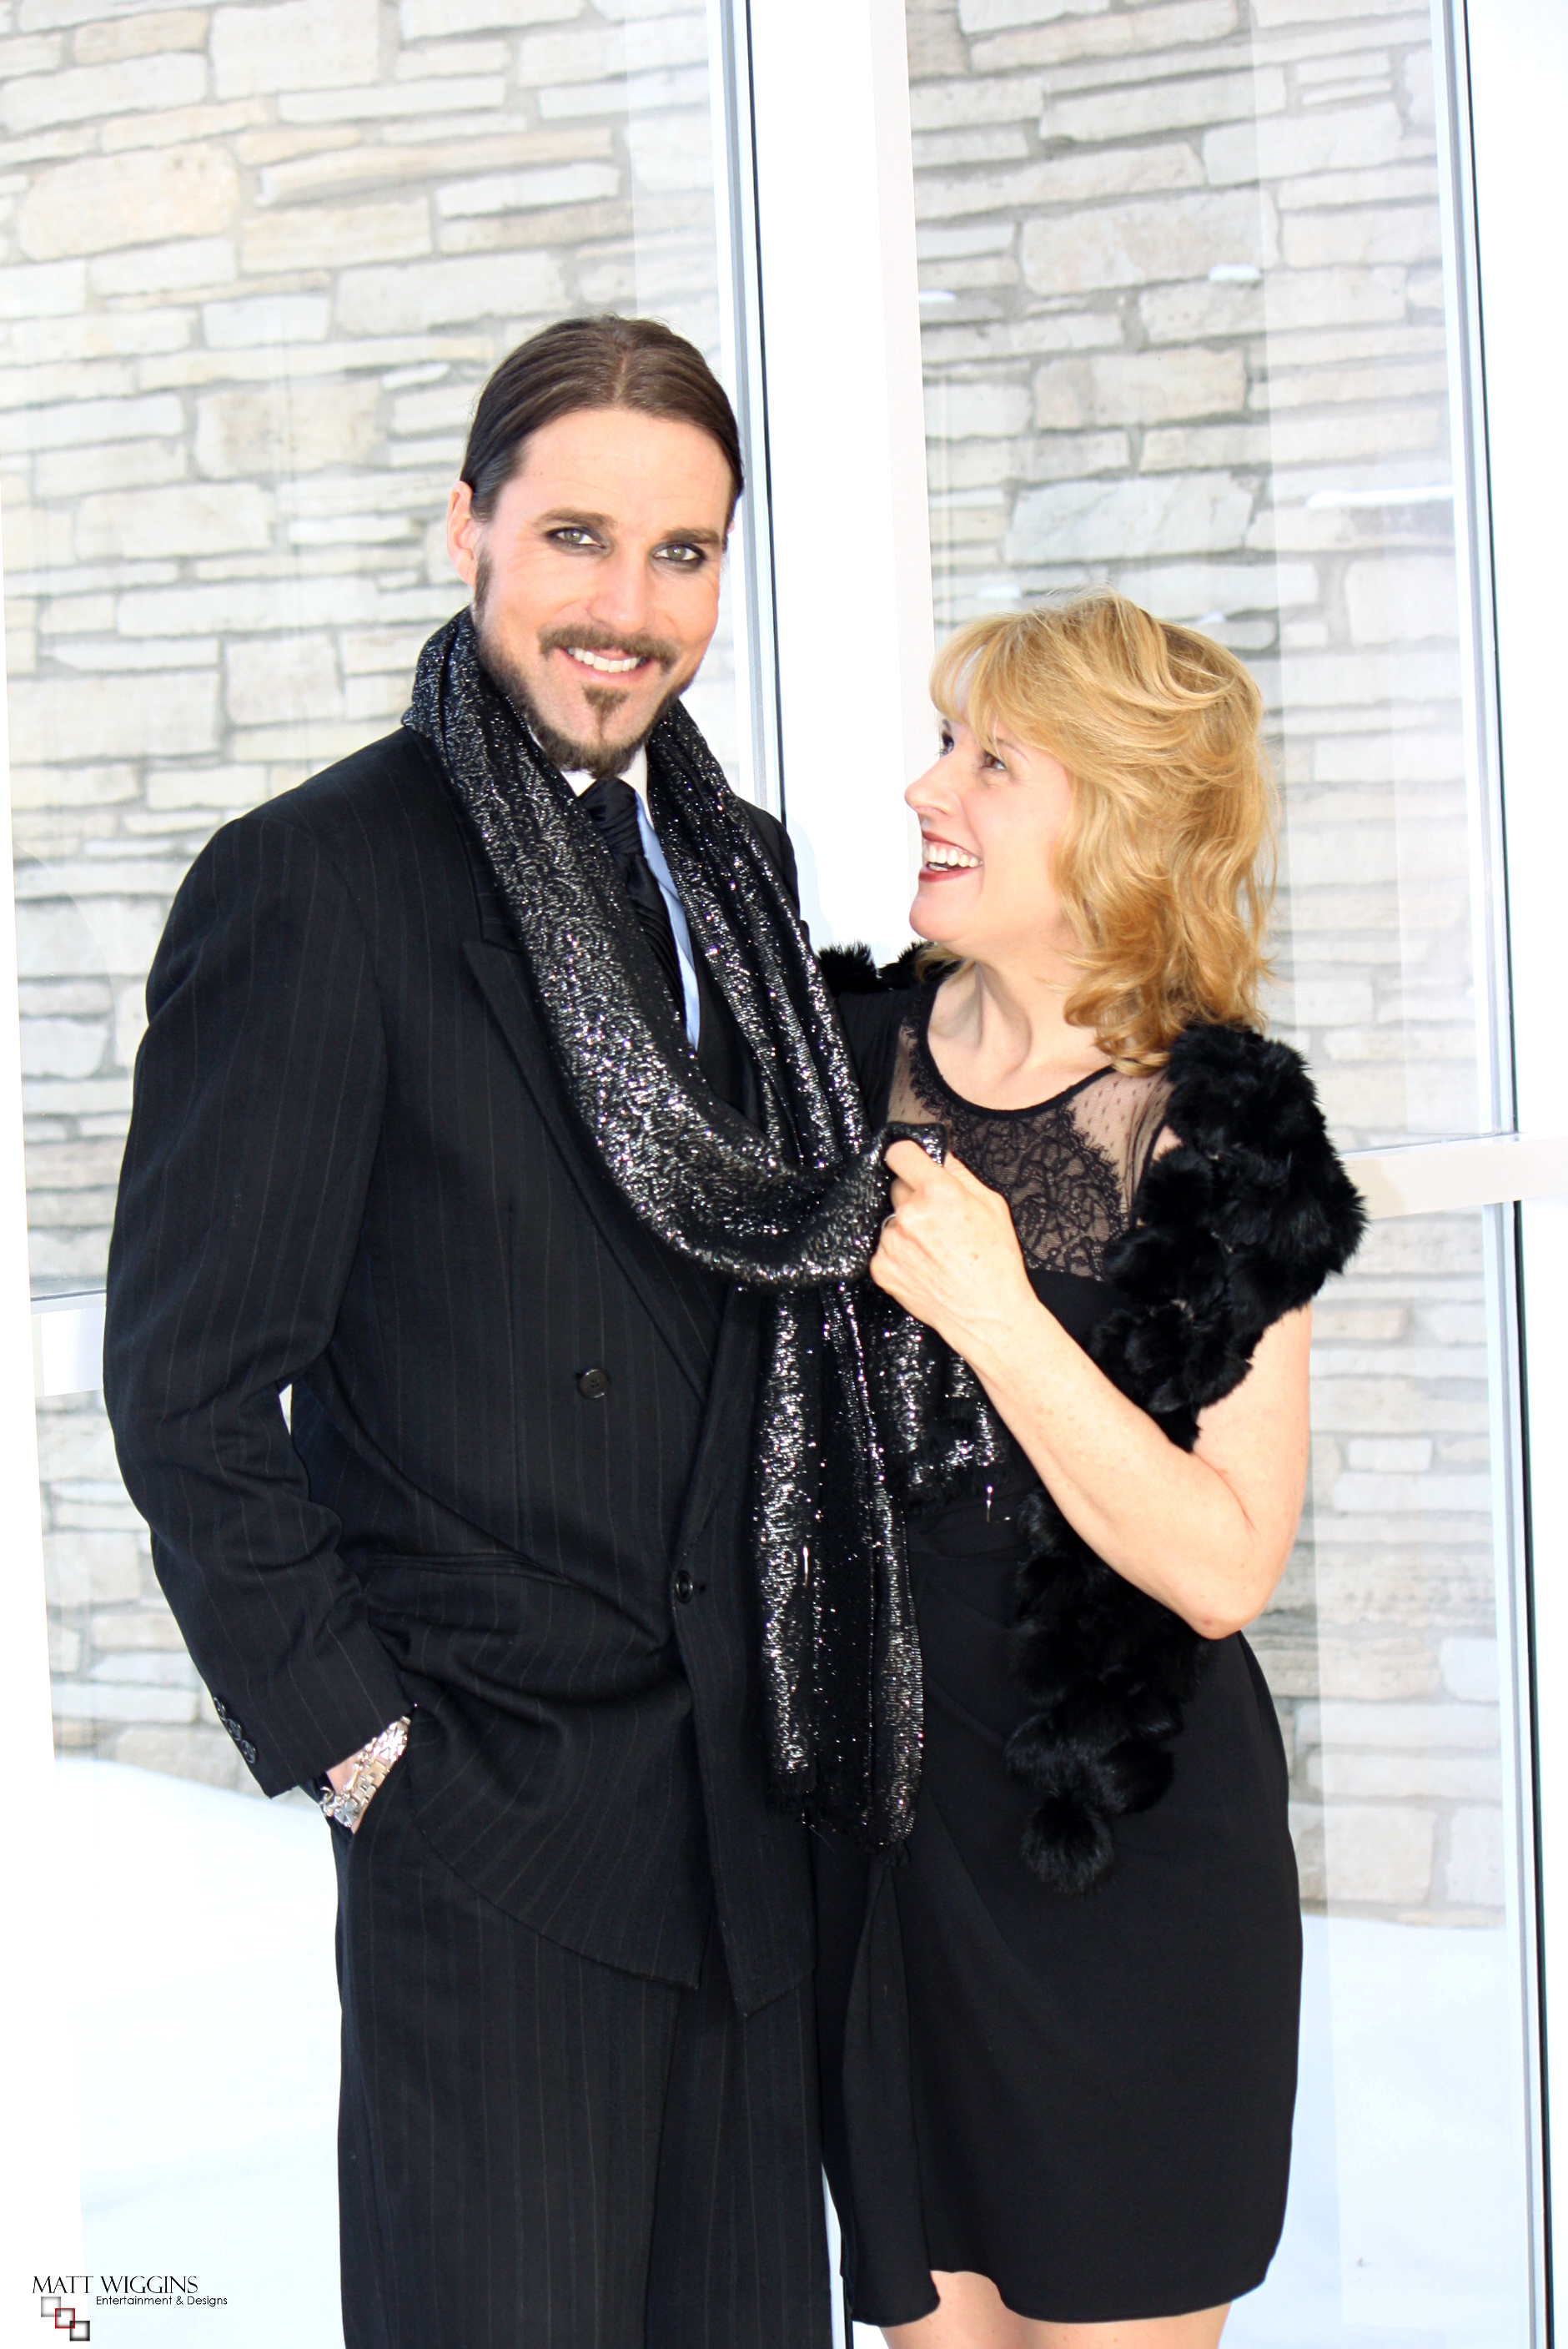 Matt Wiggins with actress Susan Lunning during a photo shoot for the 2014 Iowa Motion Picture Awards where Matt served has host and MC.